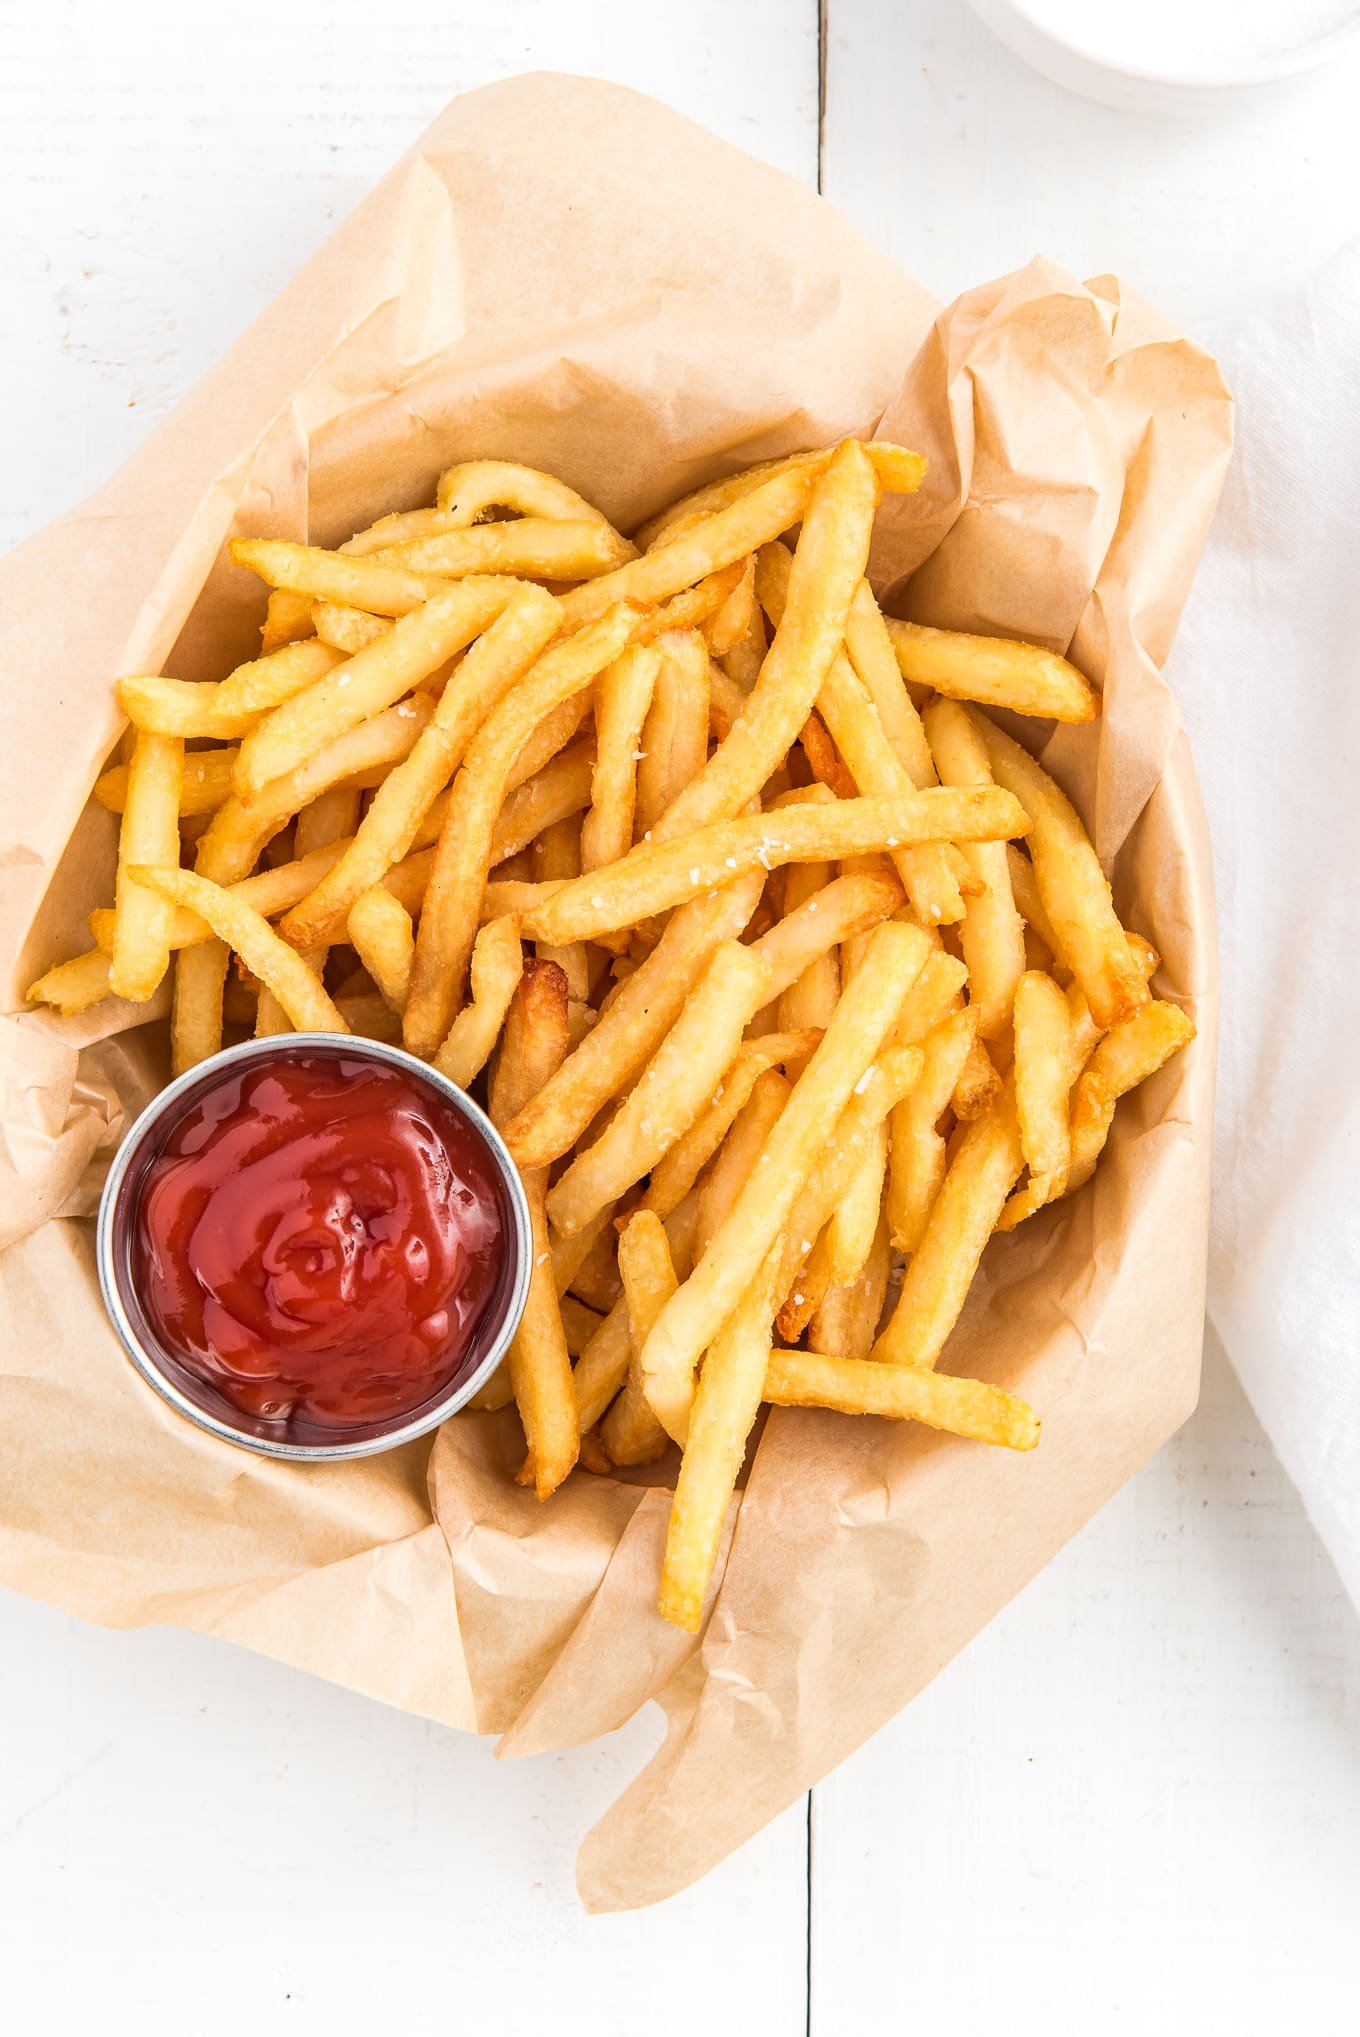 air fryer frozen french fries in a basket with a side of ketchup. / Enjoy crispy and delicious frozen French fries in minutes with this easy air fryer recipe. Get that classic crispy texture and savory flavor you love, with the convenience of the air fryer.